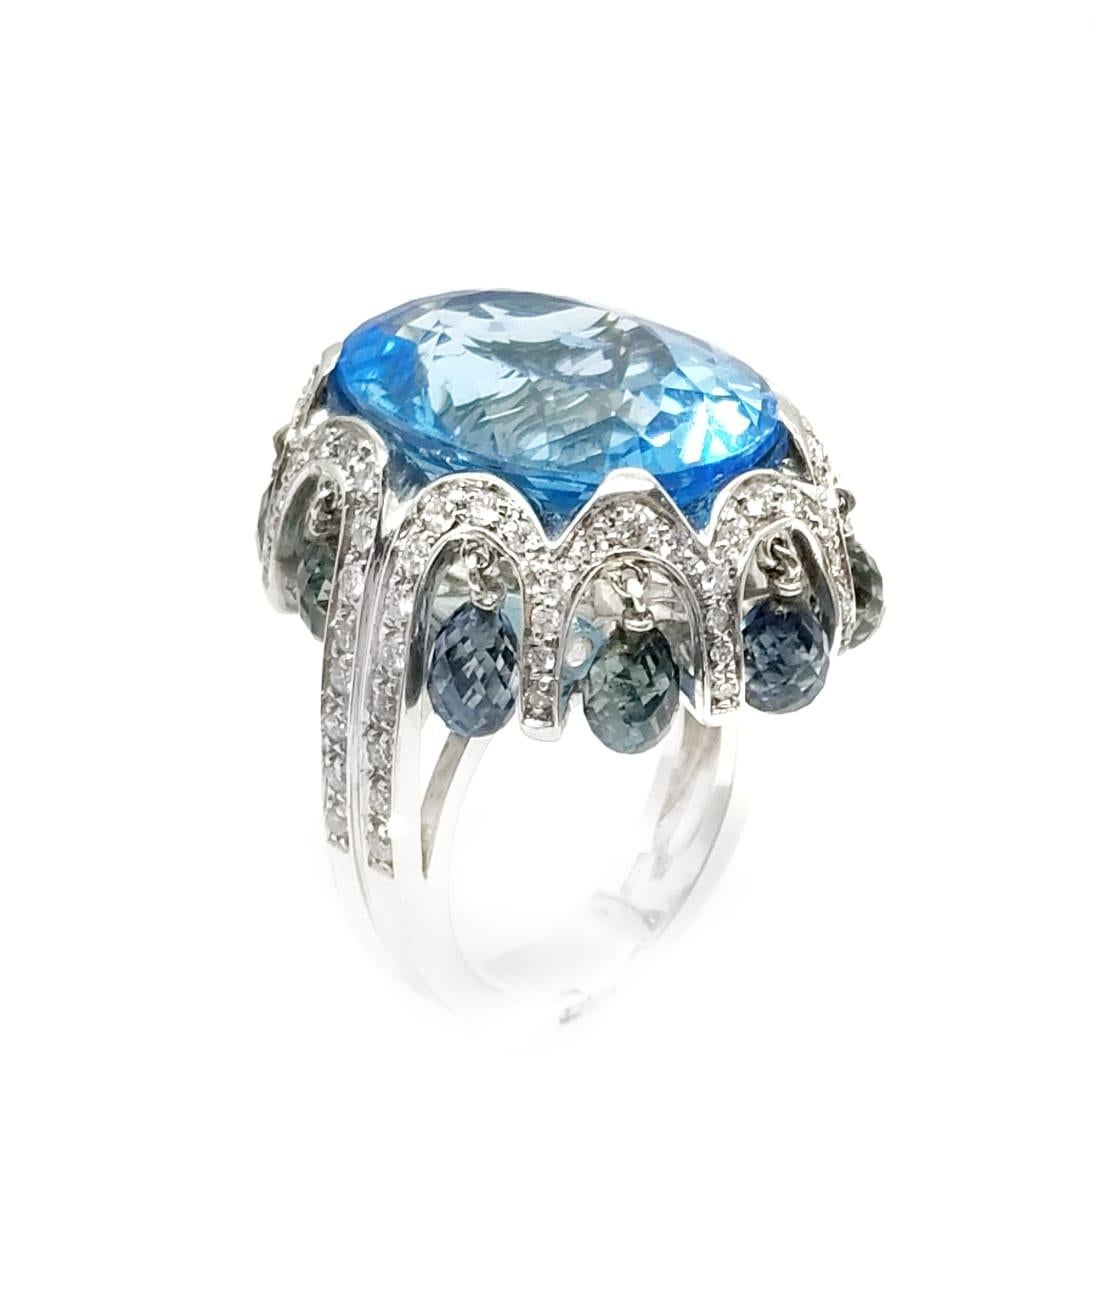 Andreoli Diamond Topaz Sapphire 18 Karat White Gold Ring

This ring features:
- 0.92 Carat Diamond
- 4.40 Carat Blue Topaz
- 8.74 Carat Briolette Sapphire
- 15.40 Gram 18K White Gold
- Made In Italy